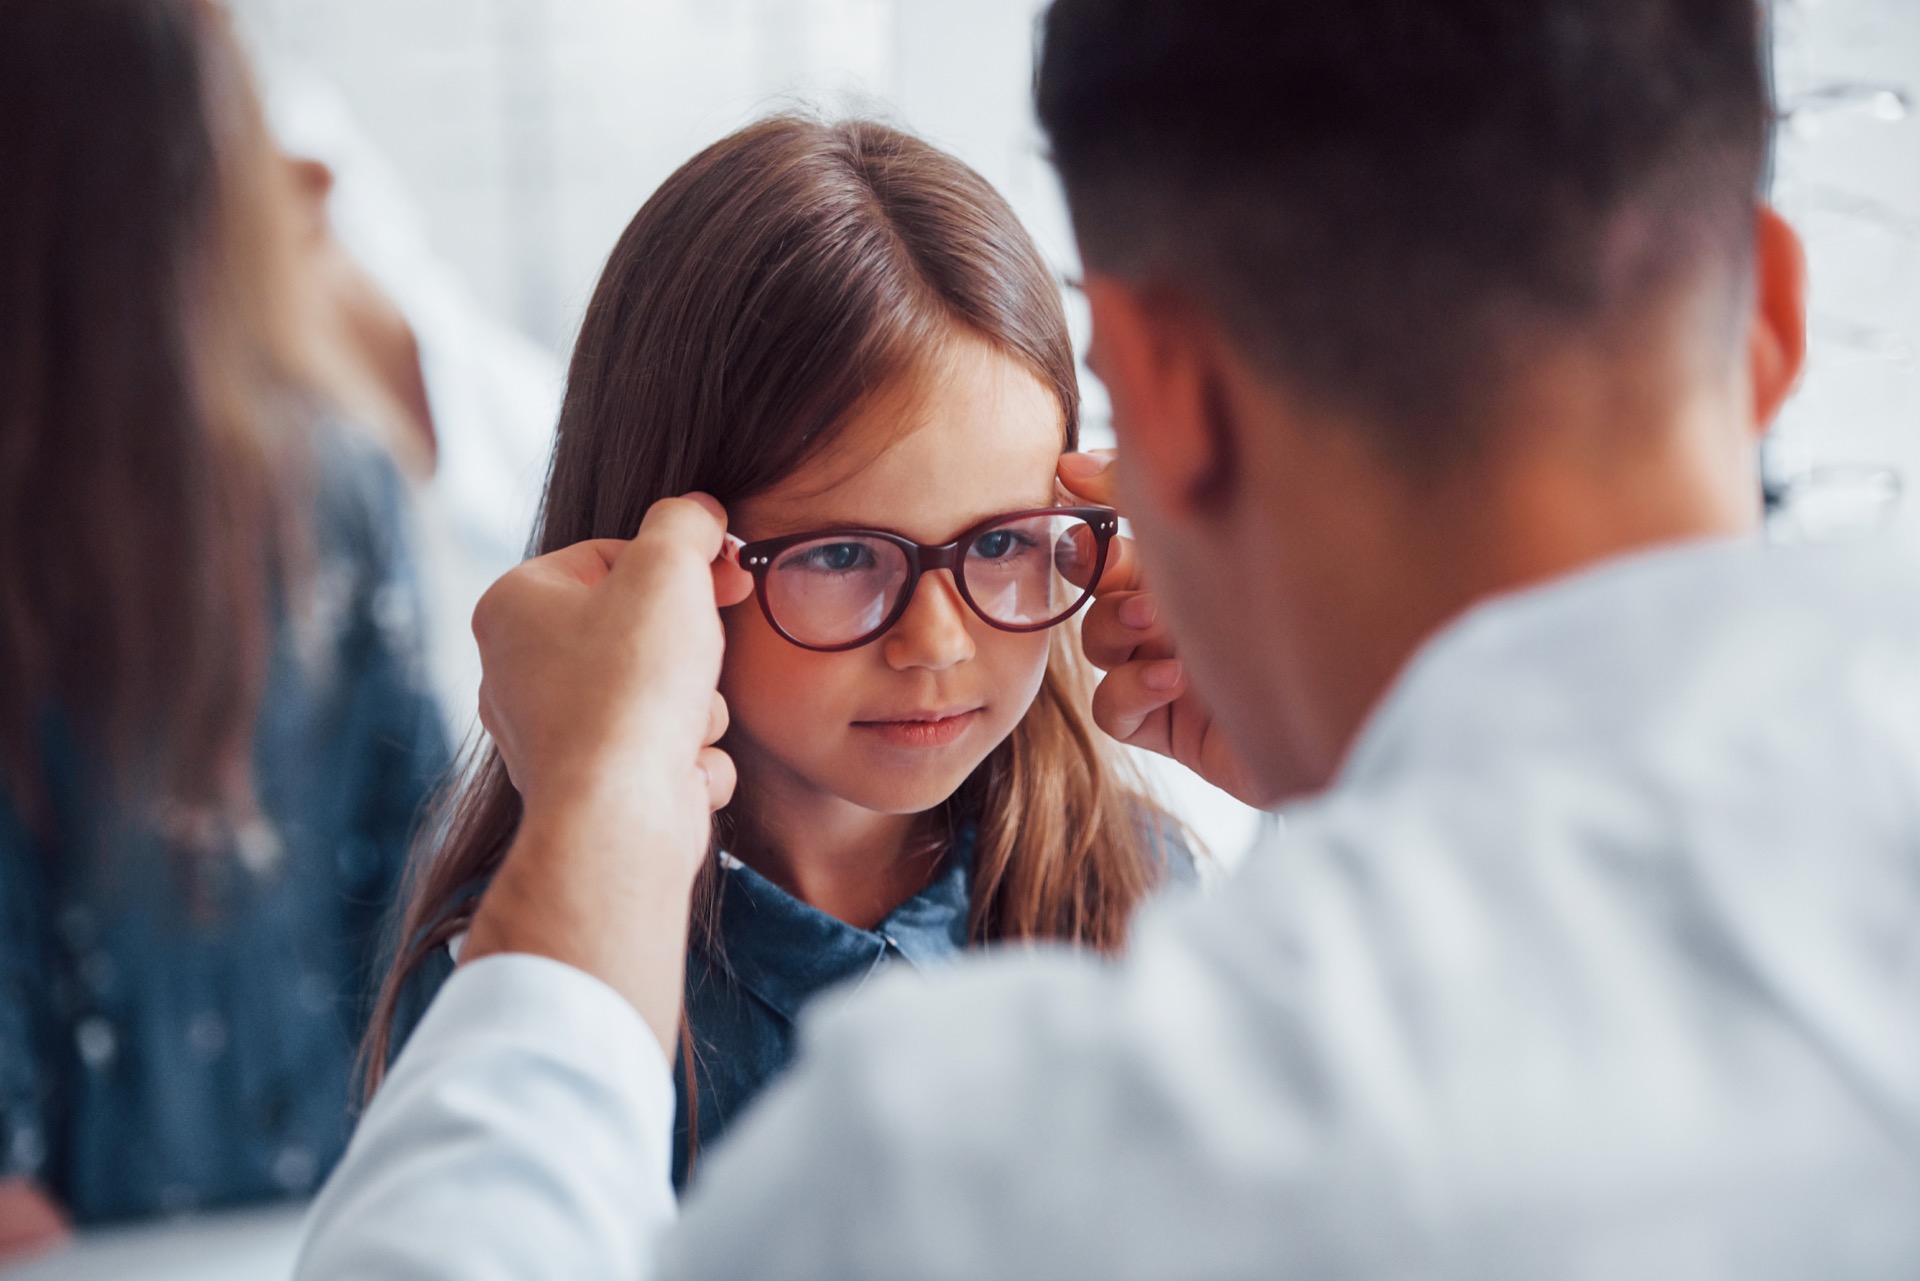 Child getting fitted for iseikonic glasses